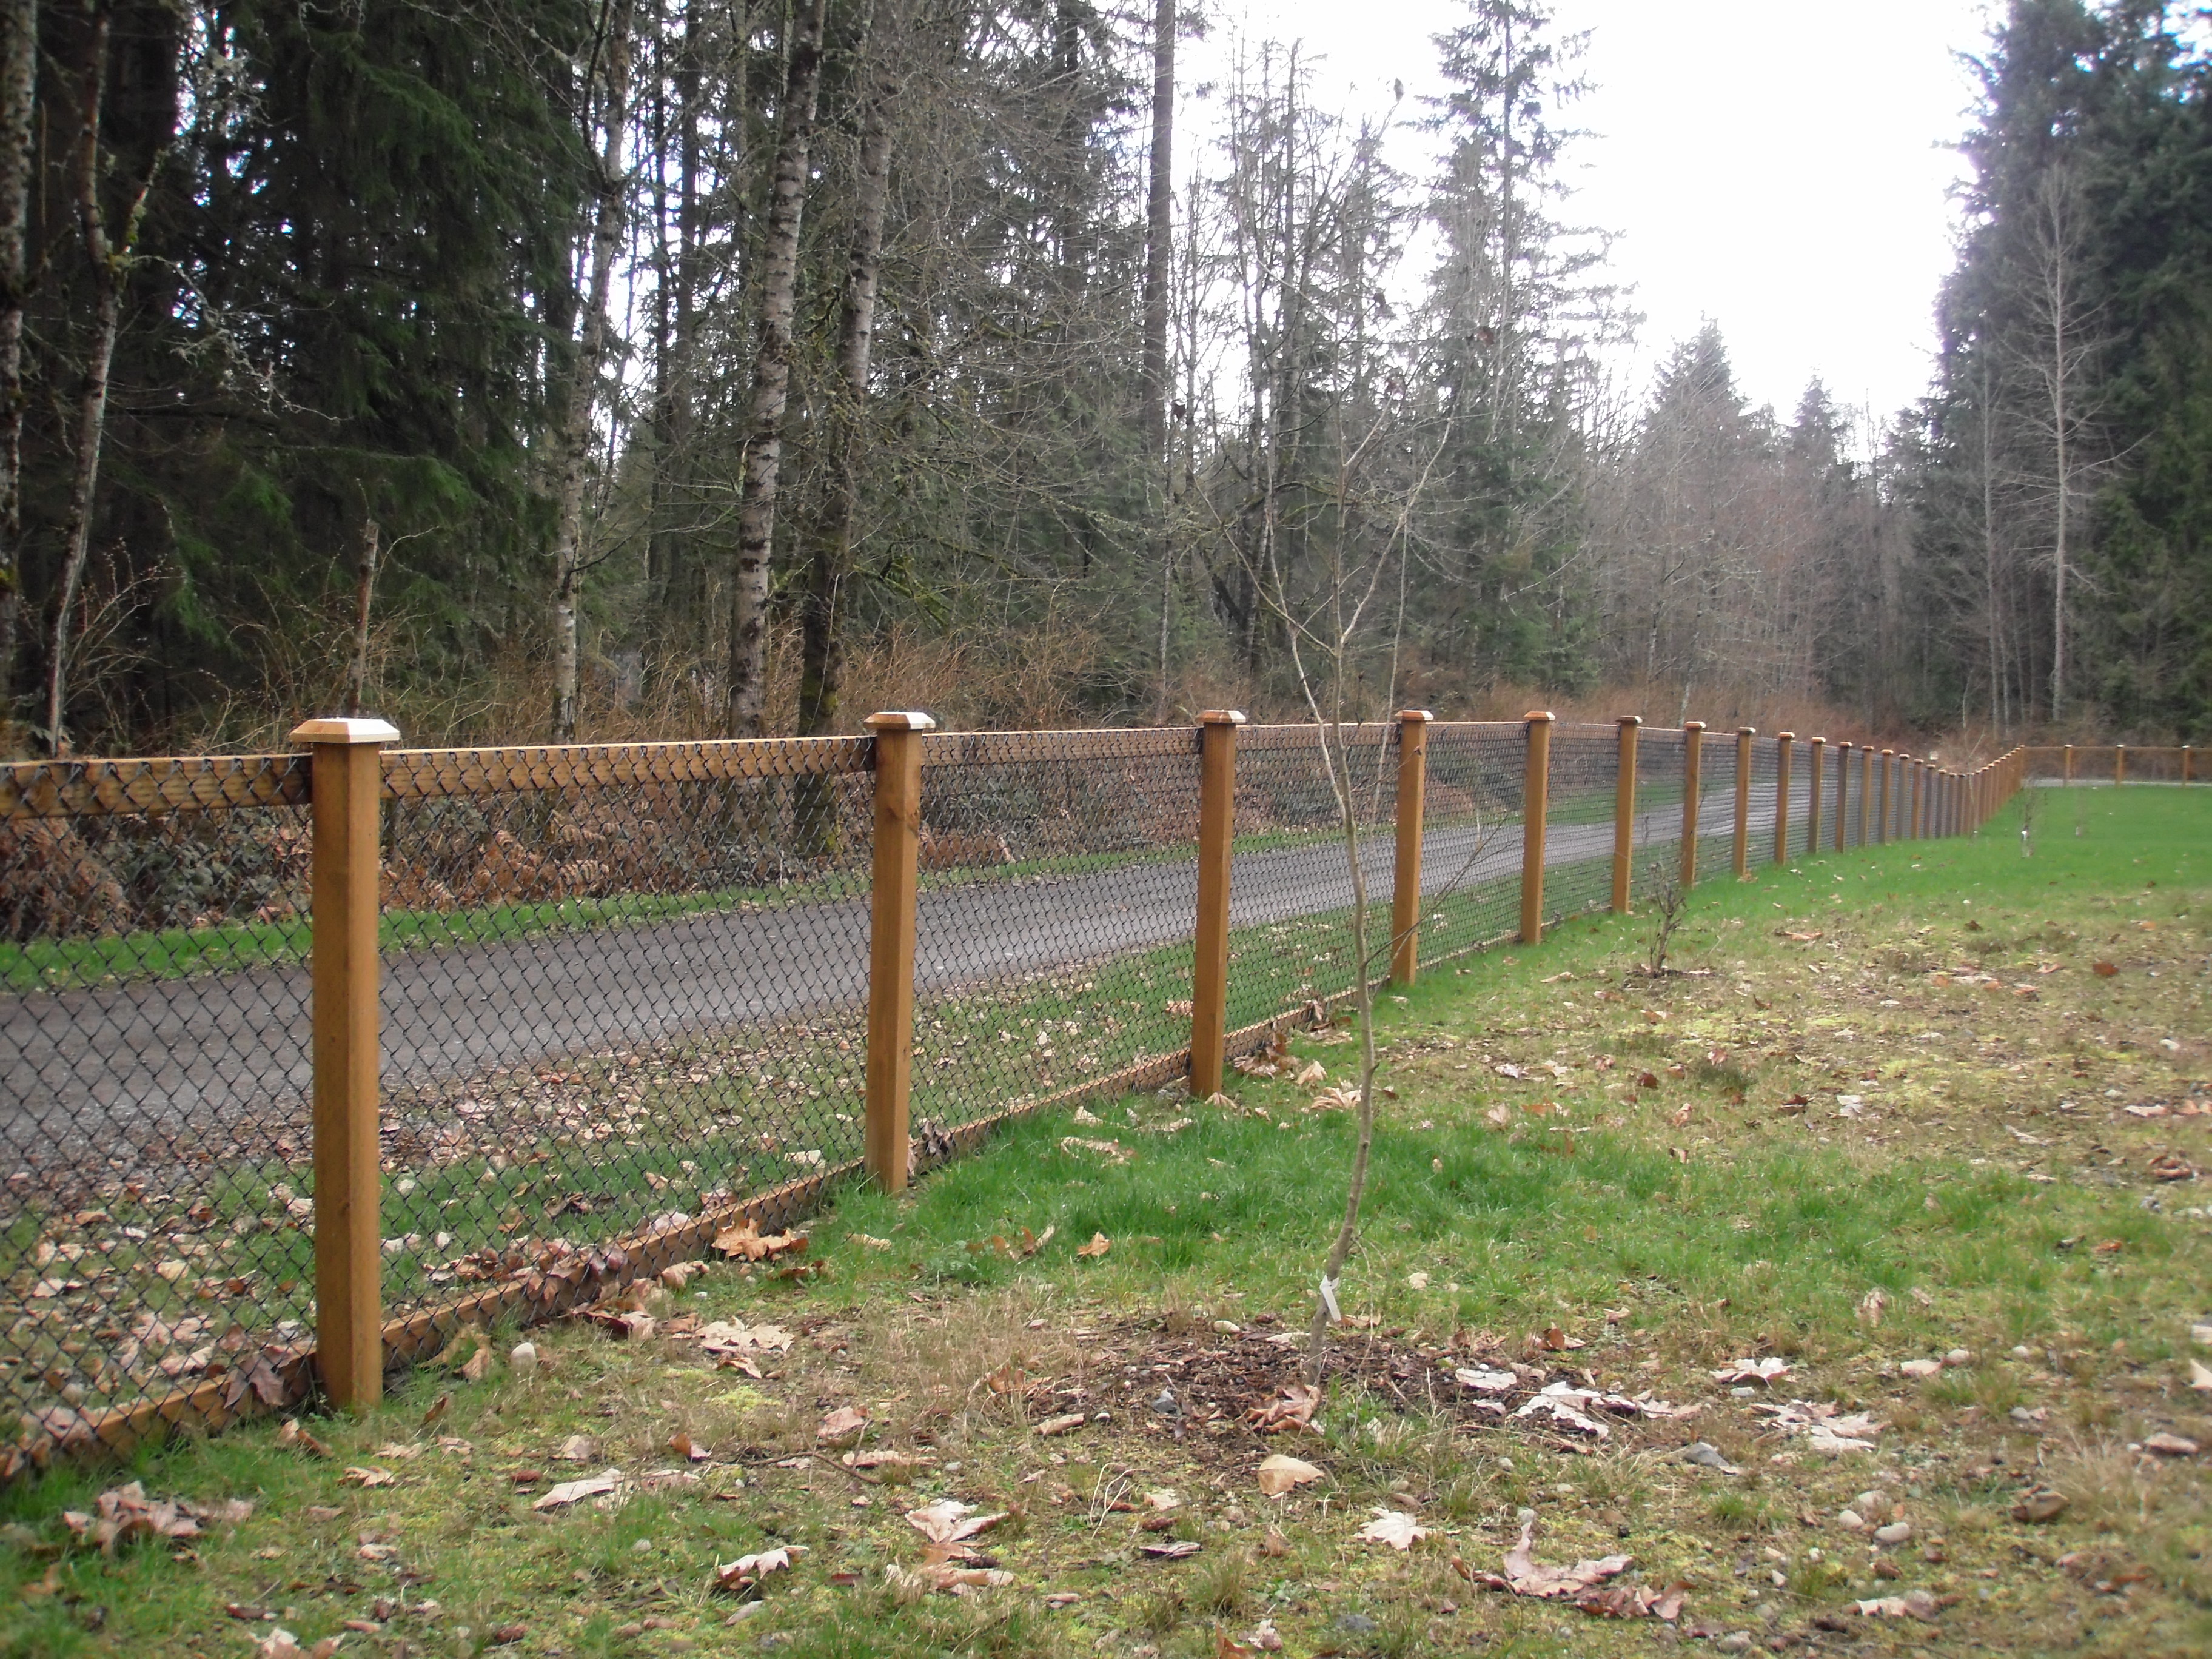 Chain Link Fencing in Sammamish, WA | City Wide Fence